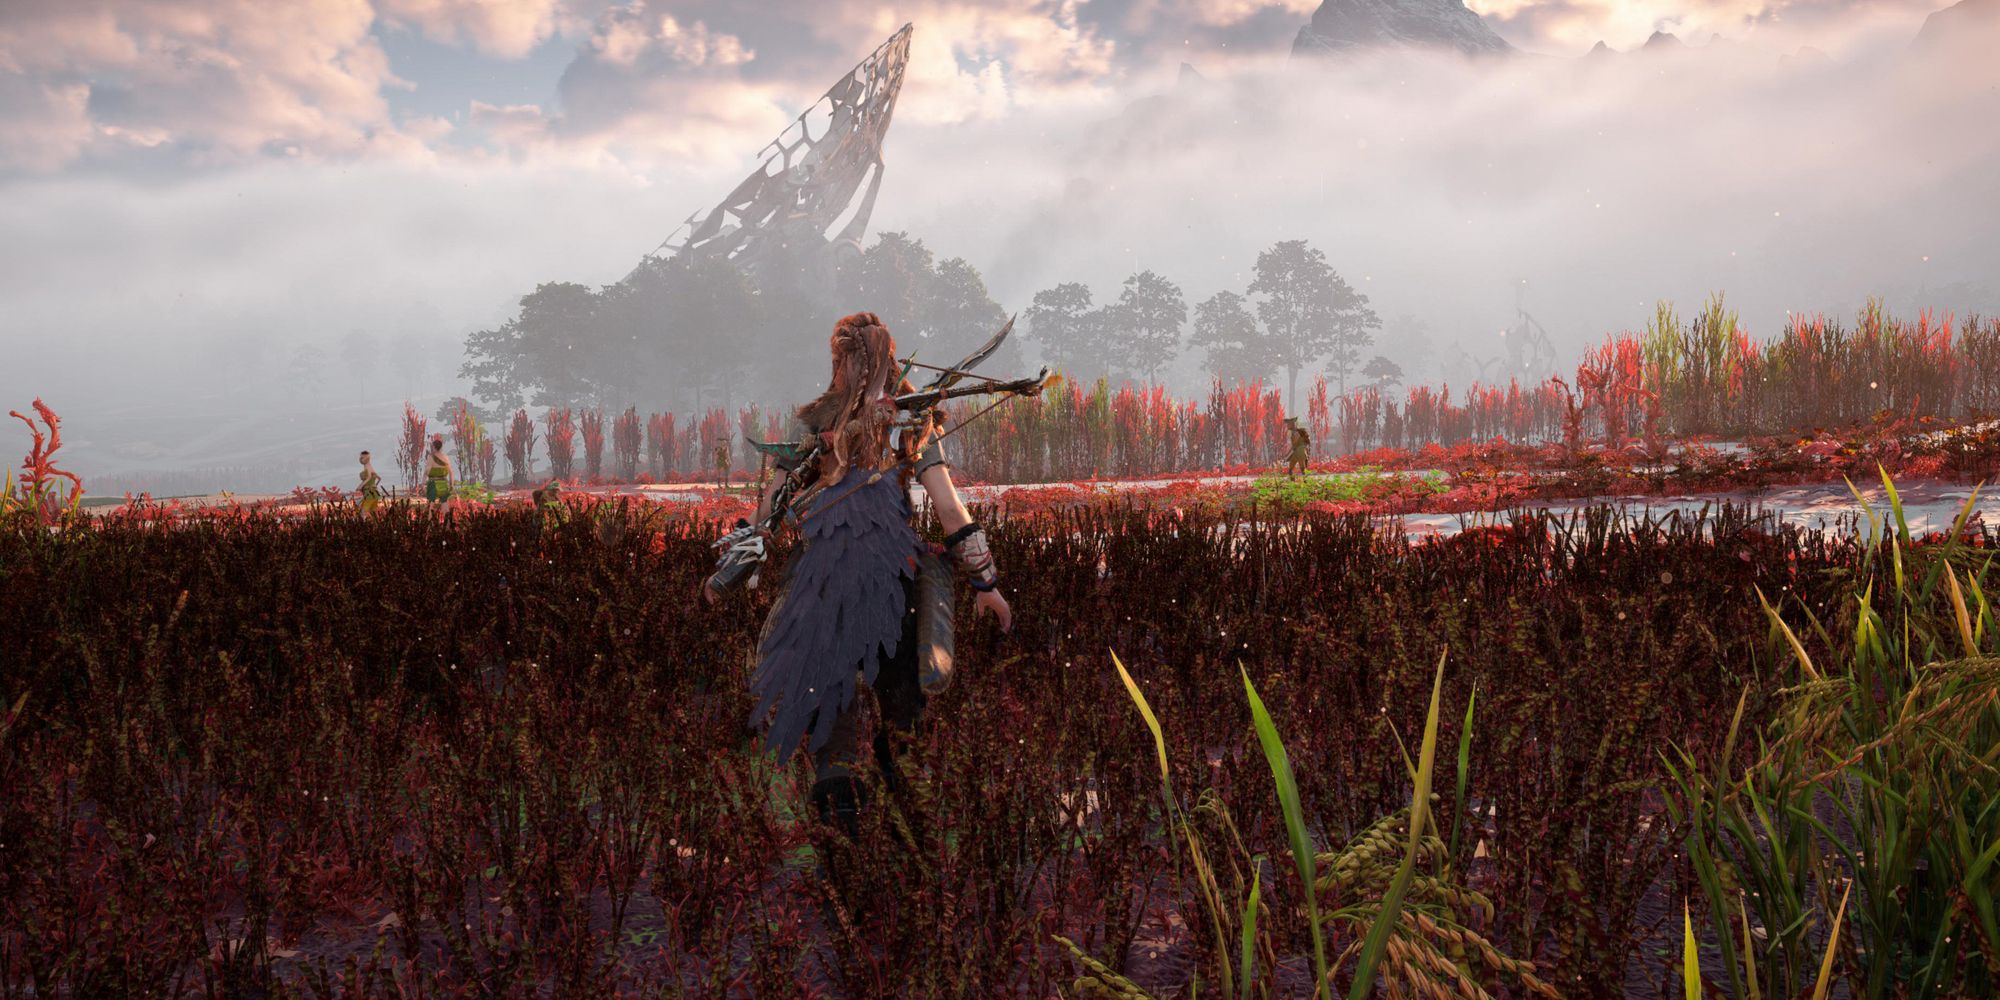 Horizon: Forbidden West, Aloy walking through the red grass with a tall structure in the distance.